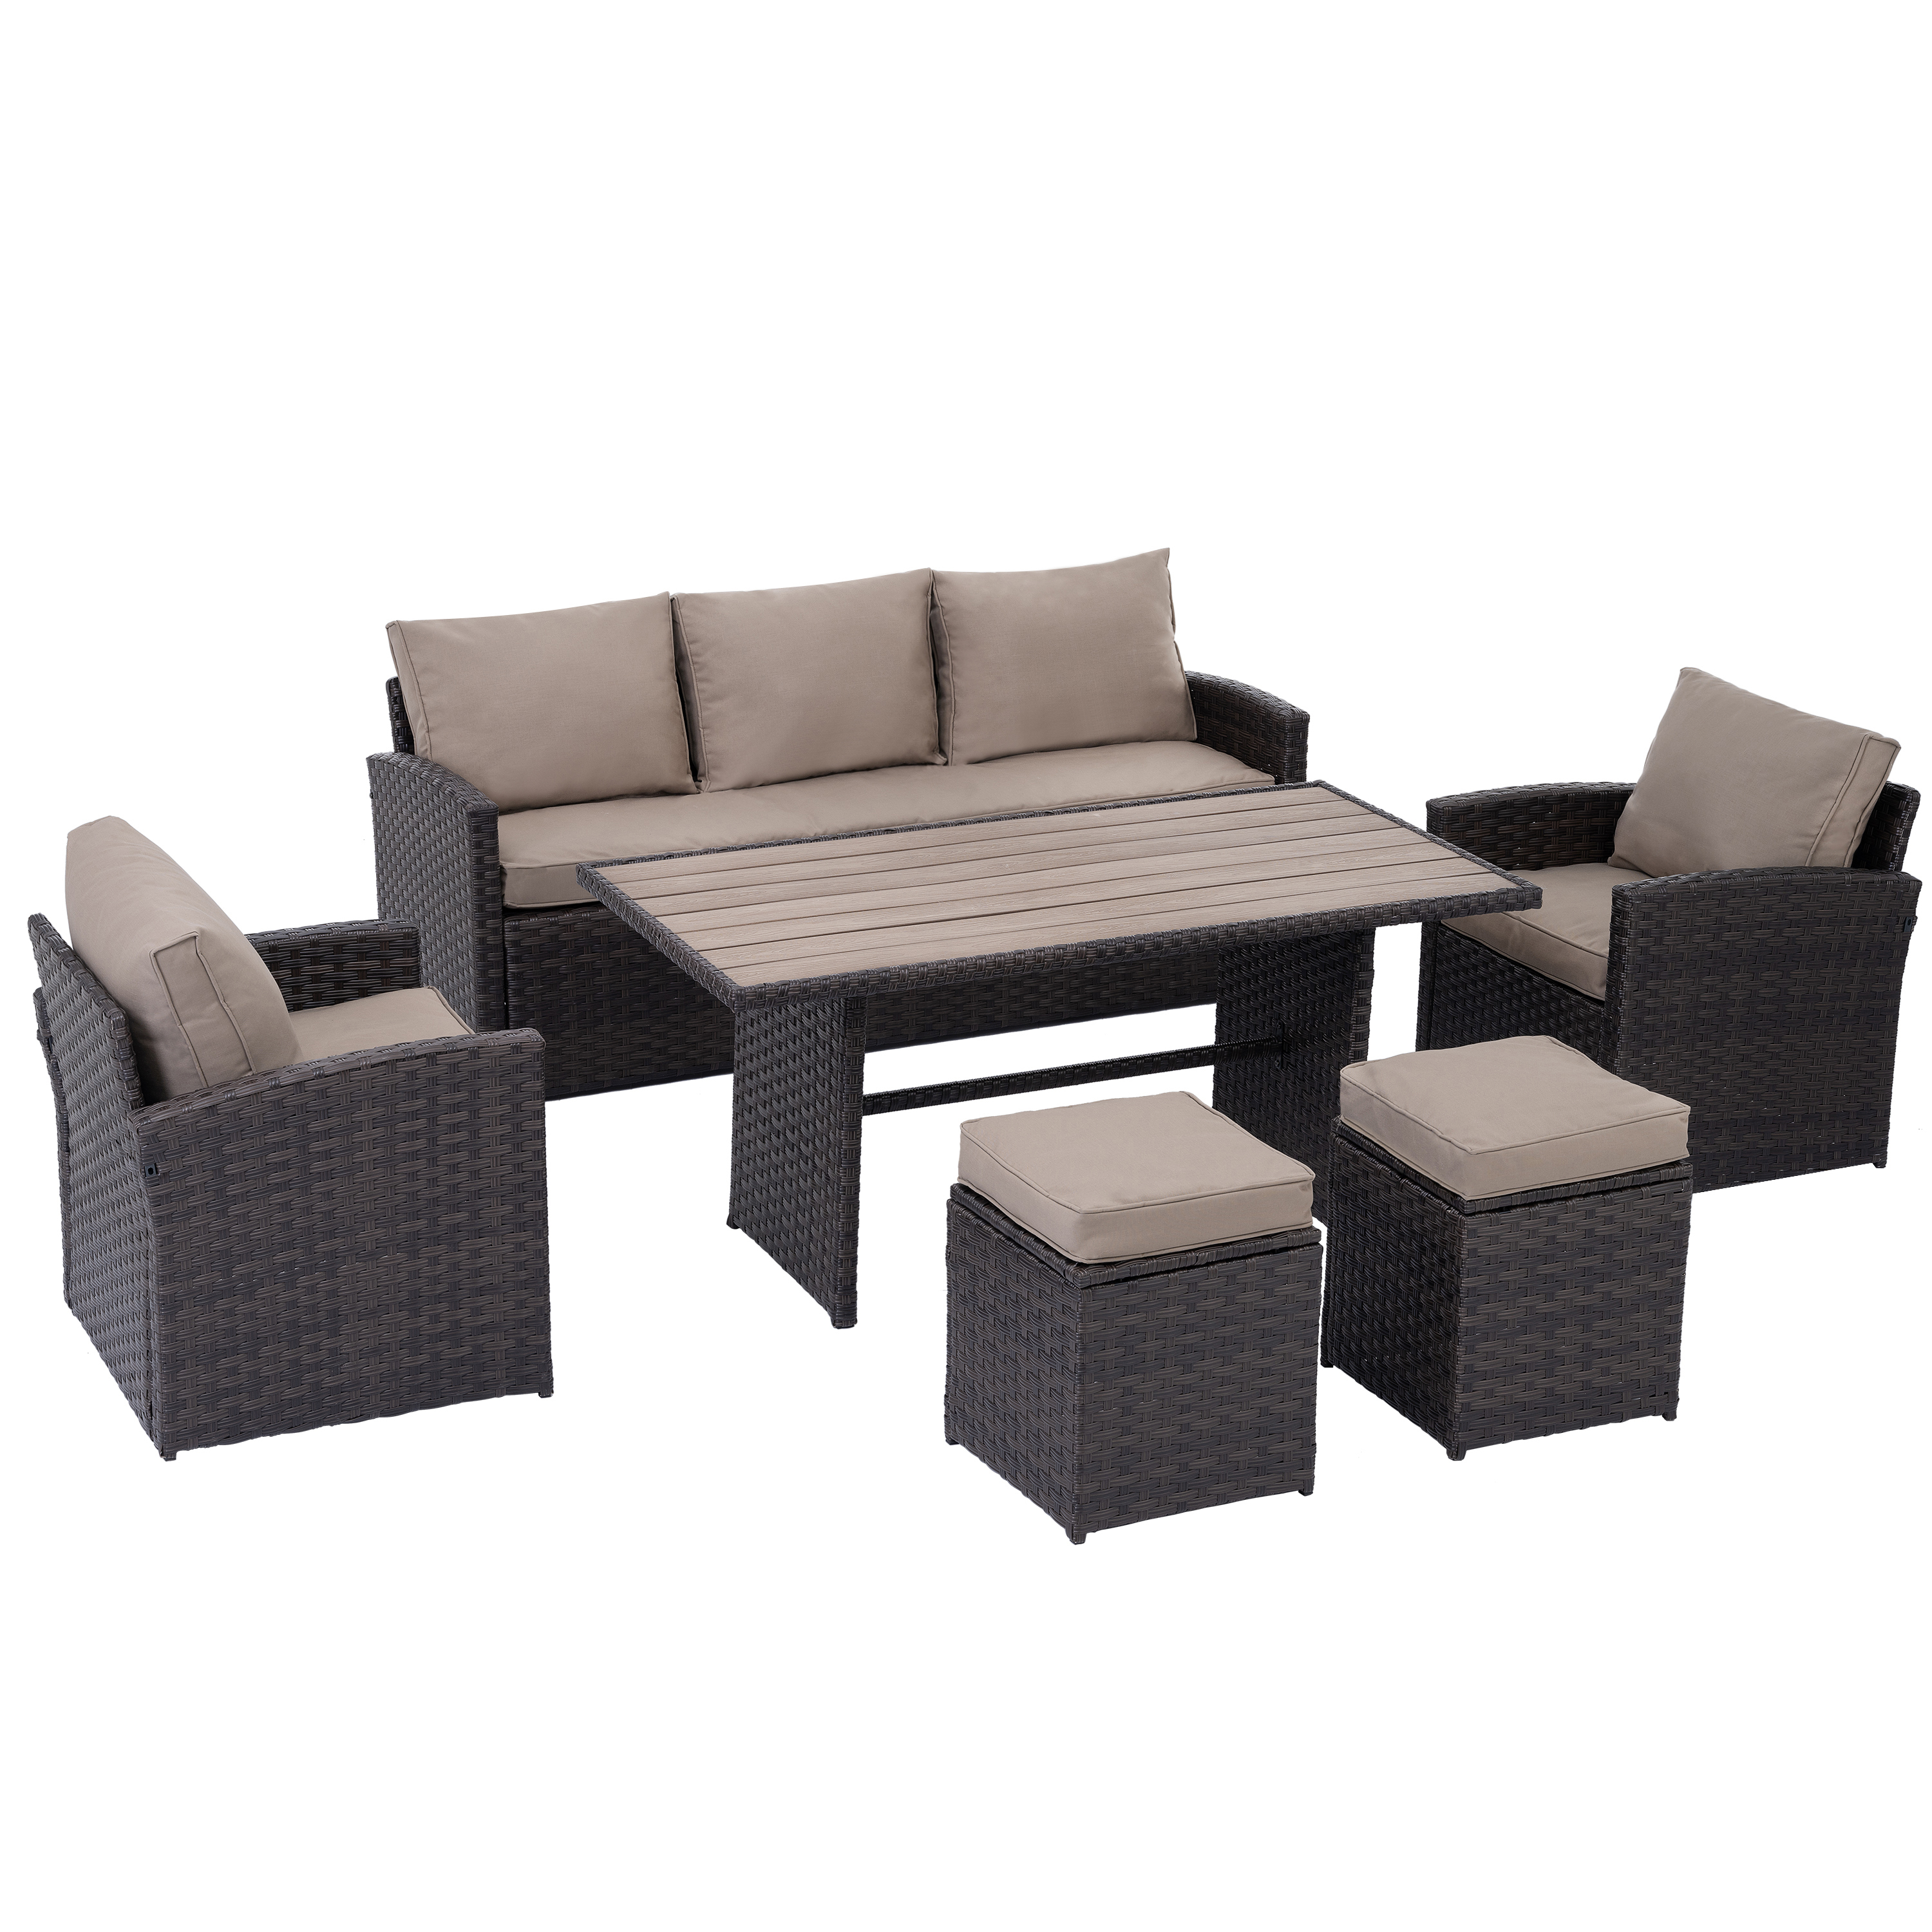 6 Piece Wicker Sectional Sofa Set, Outdoor Patio Furniture, All-Weather Rattan Garden Conversation Furniture Set, Cushioned Dining Table Set with Ottomans & Table for Patio Deck Backyard, B841 - image 5 of 9